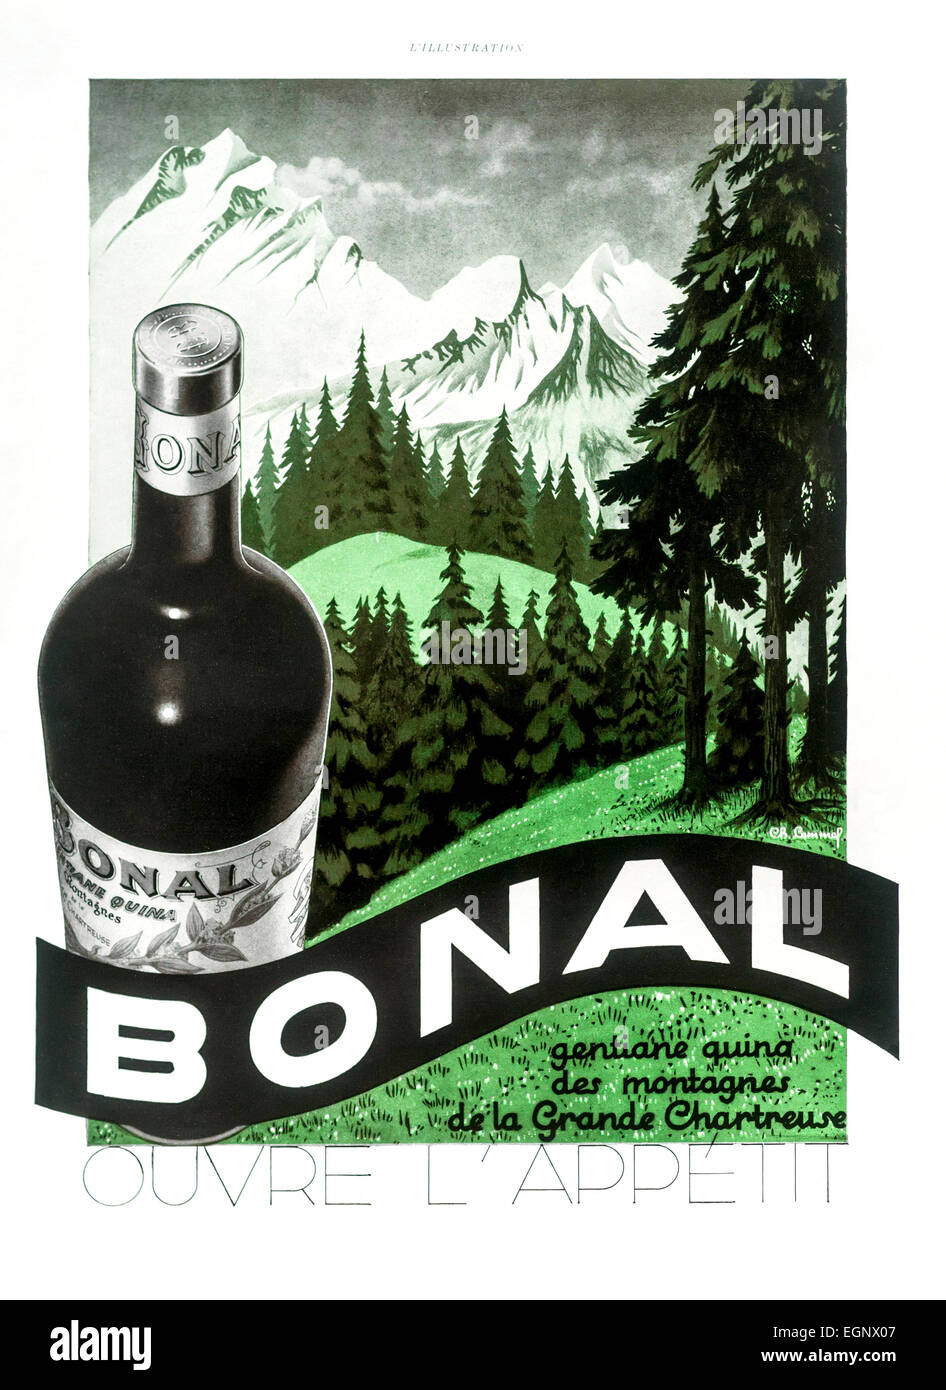 1930 advert for “Bonal” chartreuse alcoholic drink from French “L’Illustration” magazine. Stock Photo